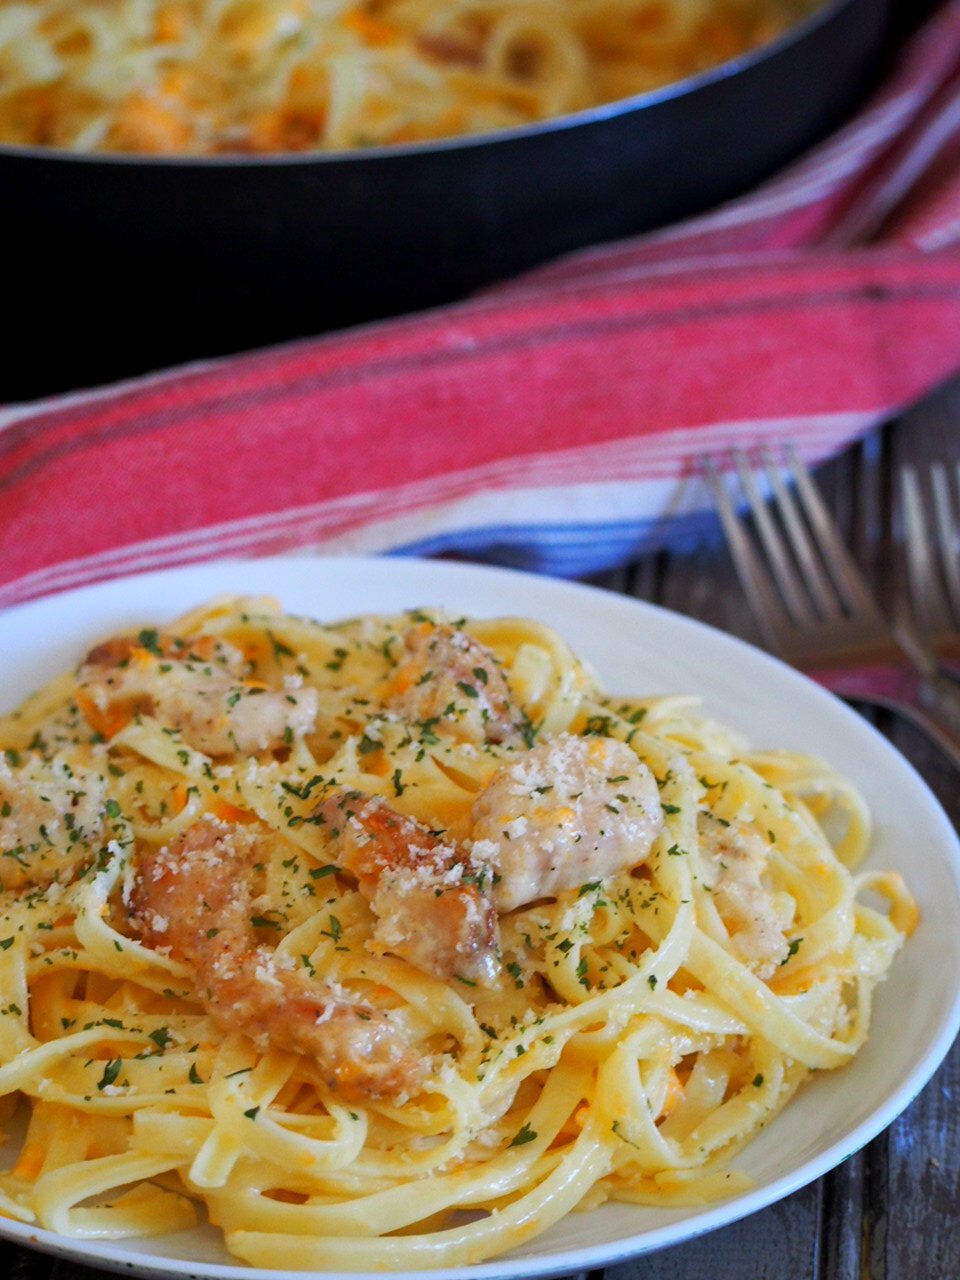 No parmesan? No problem! This Cheddar Cheese Chicken Fettuccine Alfredo is a tasty and classy meal that is done in no time. This is your perfect pasta on a weekday- fast, easy and delicious.